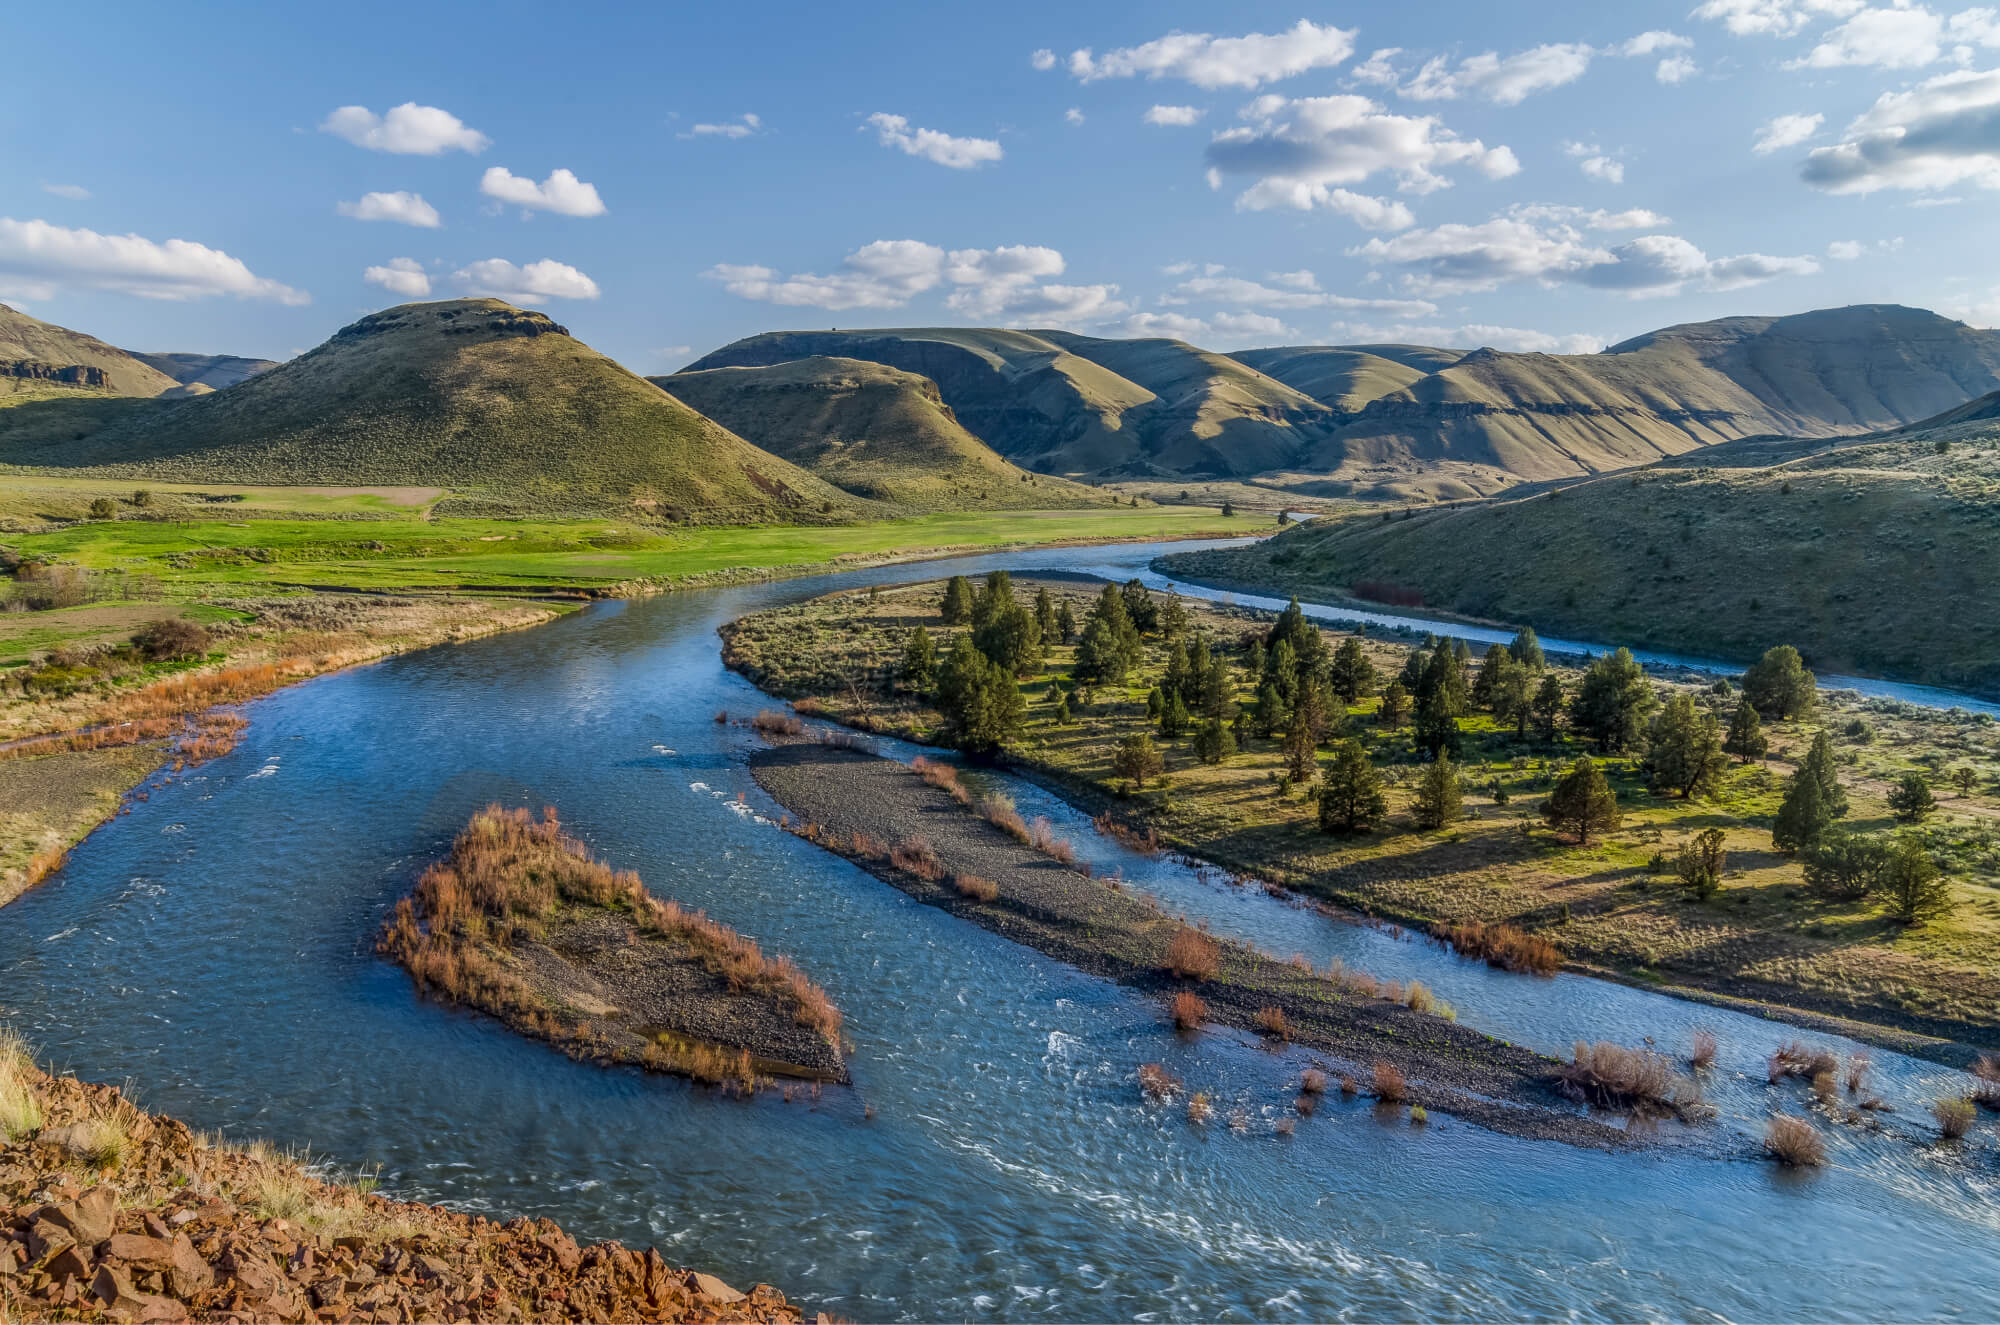 John Day River - Western Rivers Conservancy